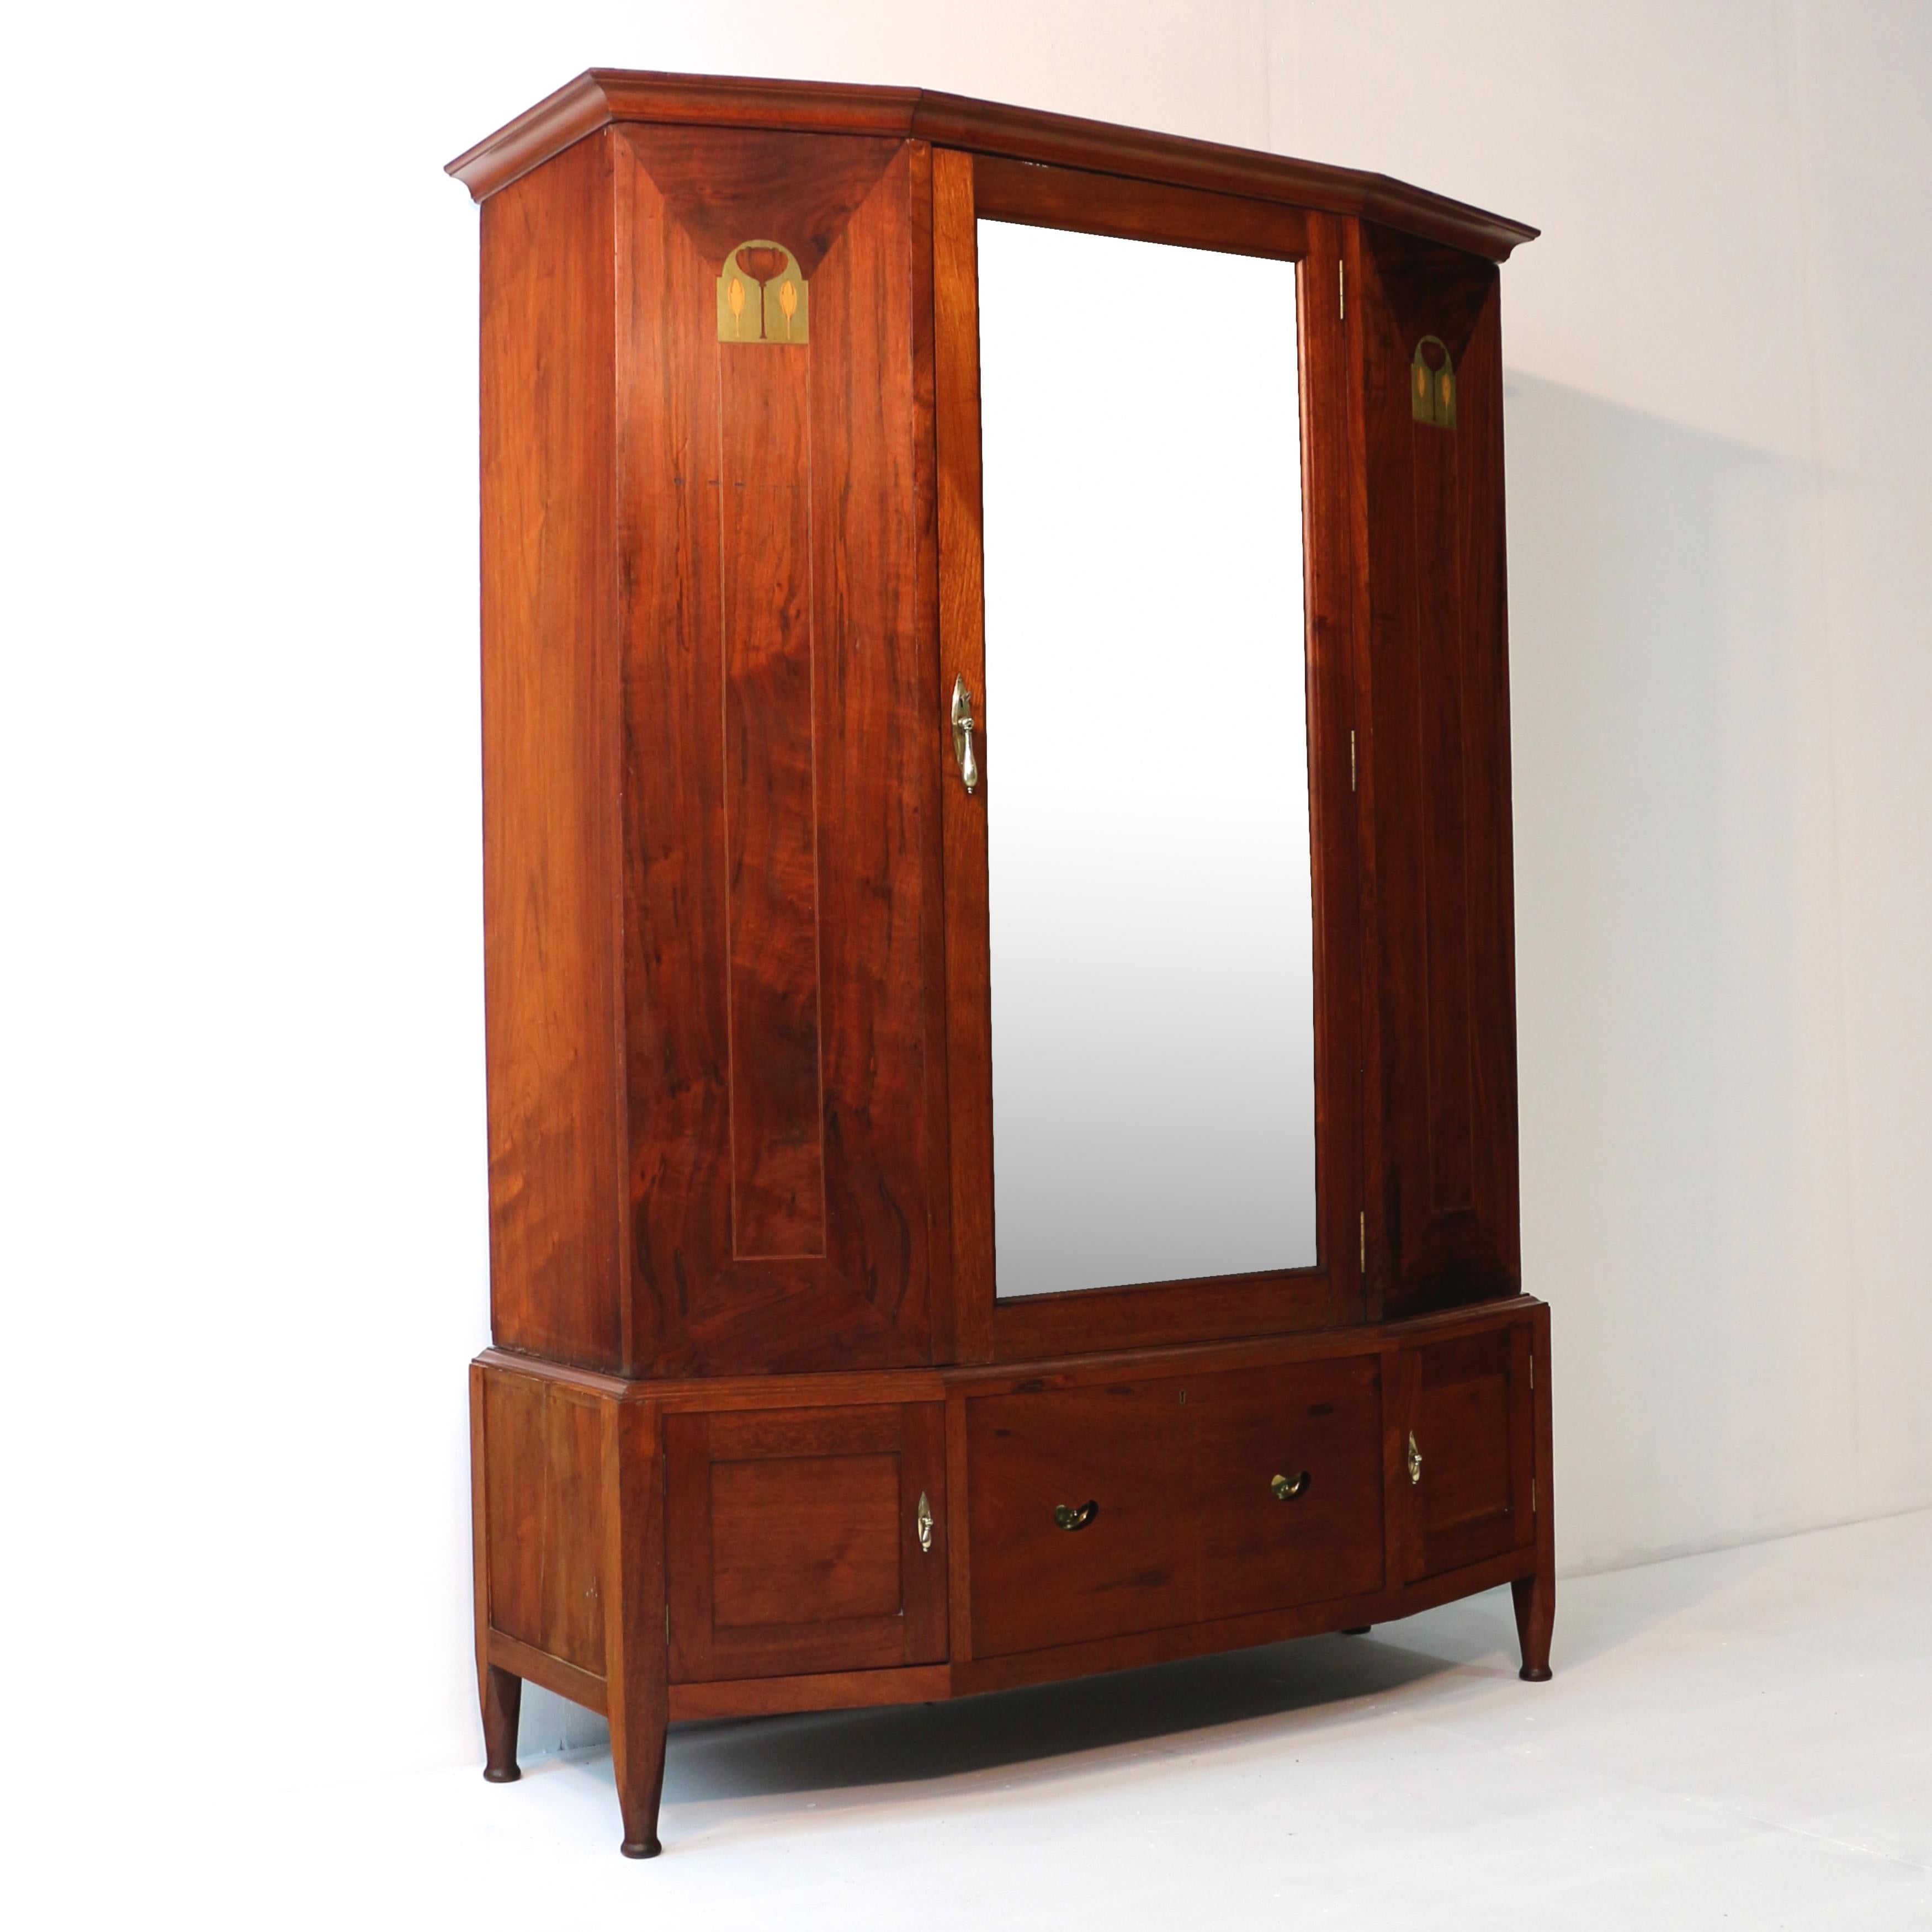 A super Glasgow School inlaid walnut wardrobe attributed to Wylie & Lochhead of Glasgow. With both Arts & Crafts and Art Nouveau influences it featured a canted D-shaped front, rich coloured well-figured solid walnut timbers and stylised flower and